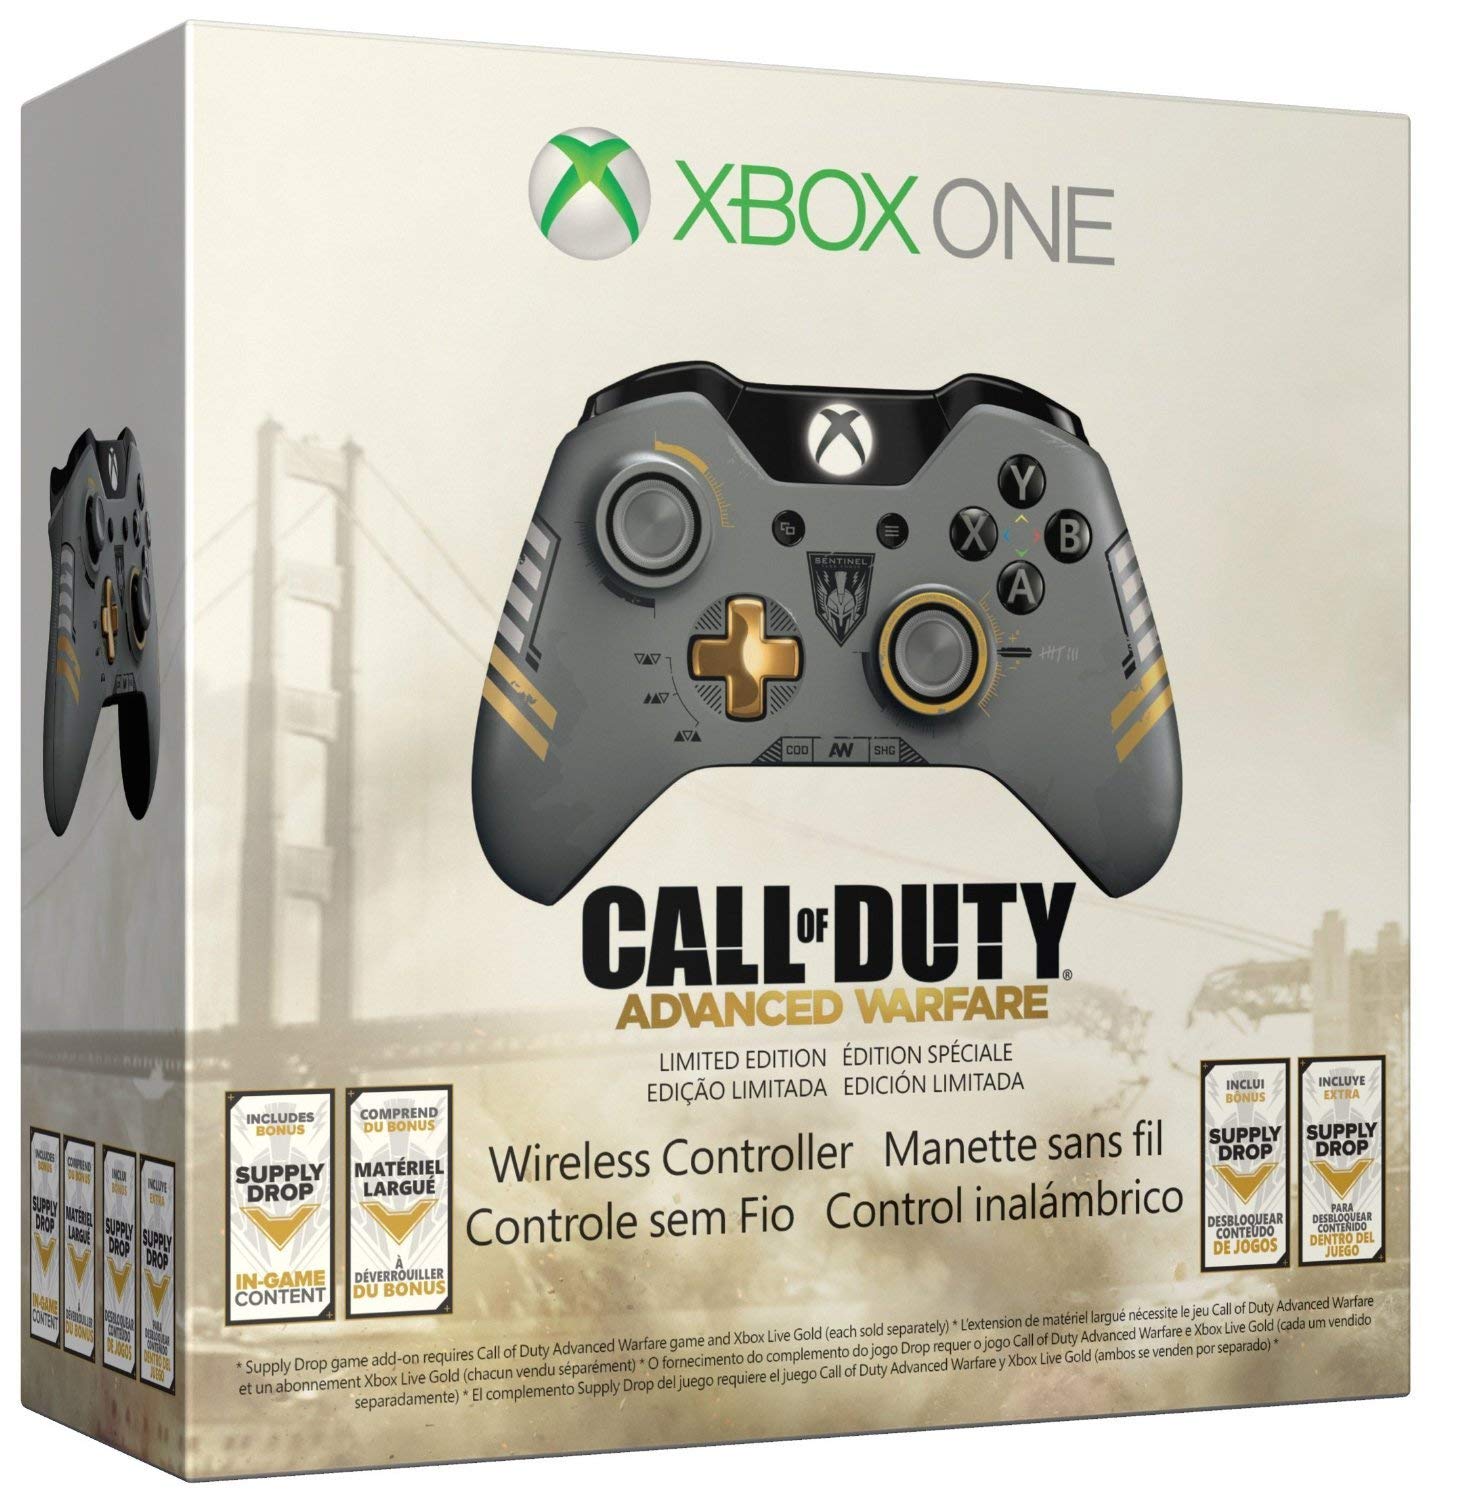 Xbox One Wireless Controller Call of Duty Advanced Warfare Limited Edition